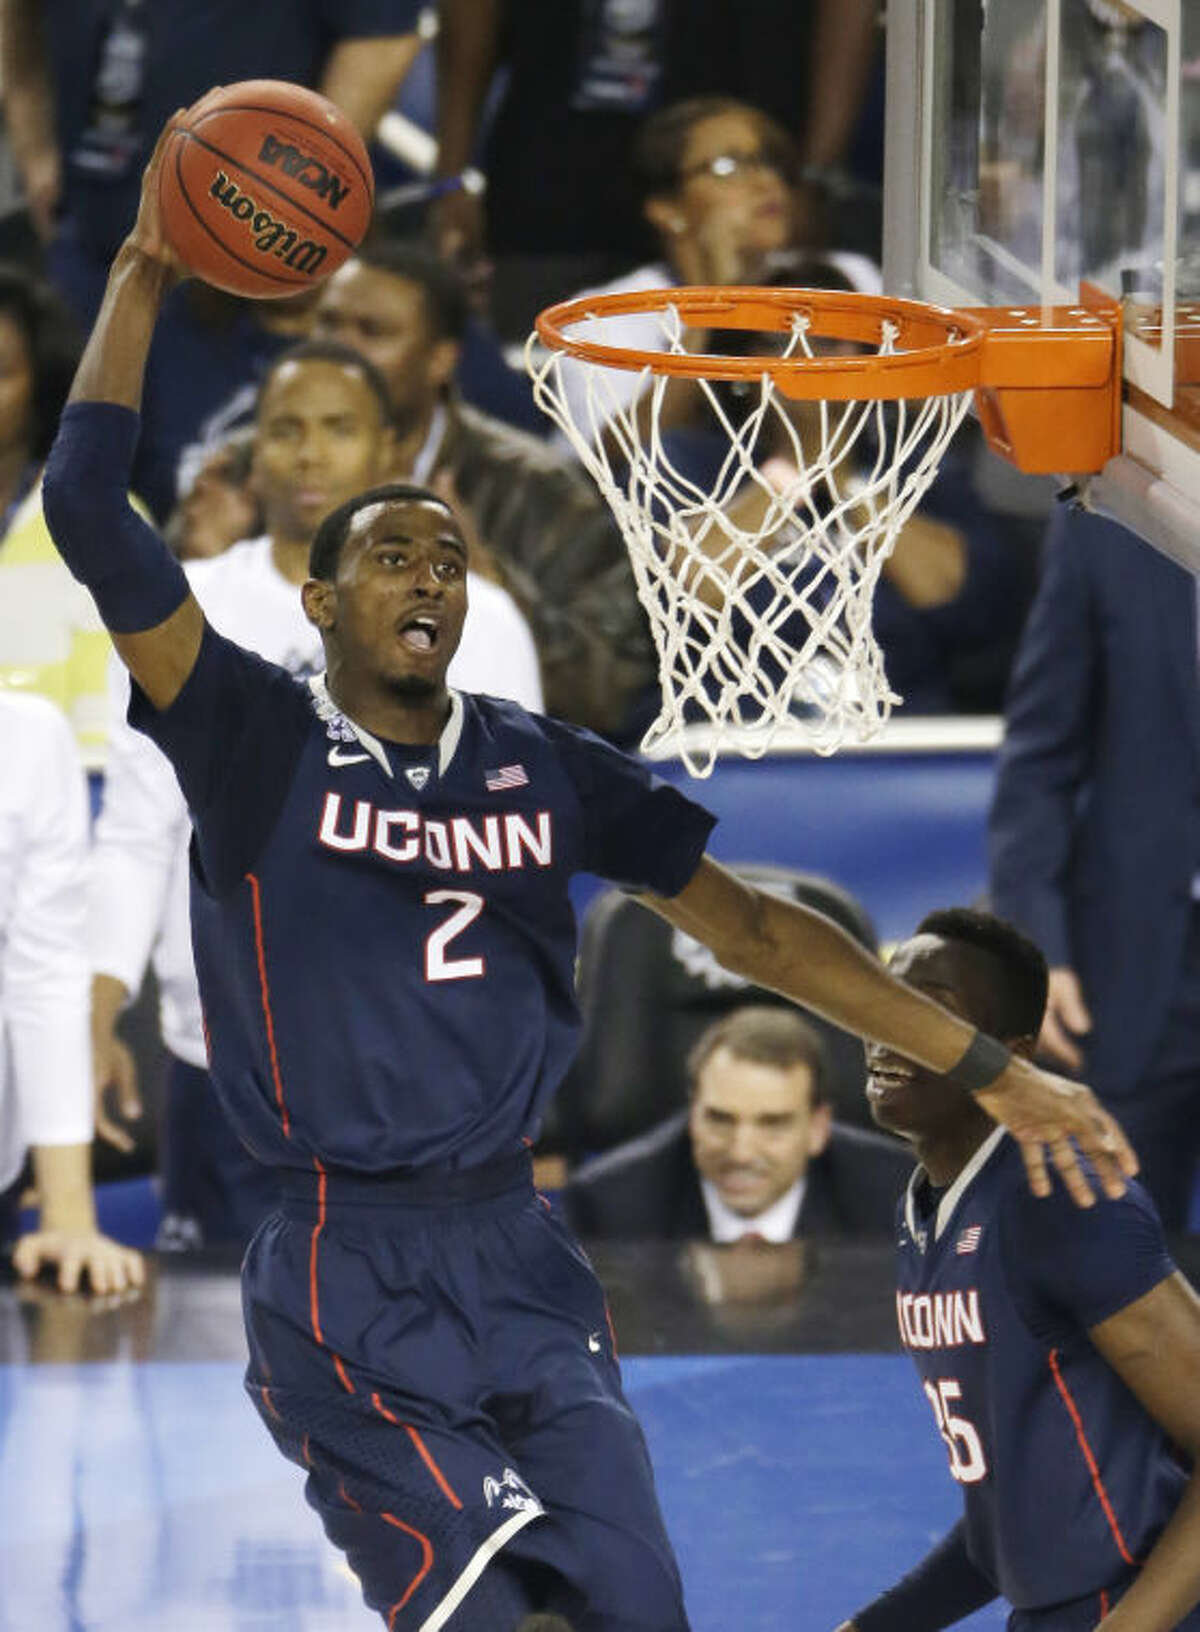 Connecticut forward DeAndre Daniels dunks the ball during the second half of the NCAA Final Four tournament college basketball semifinal game against Florida Saturday, April 5, 2014, in Arlington, Texas. (AP Photo/Tony Gutierrez)